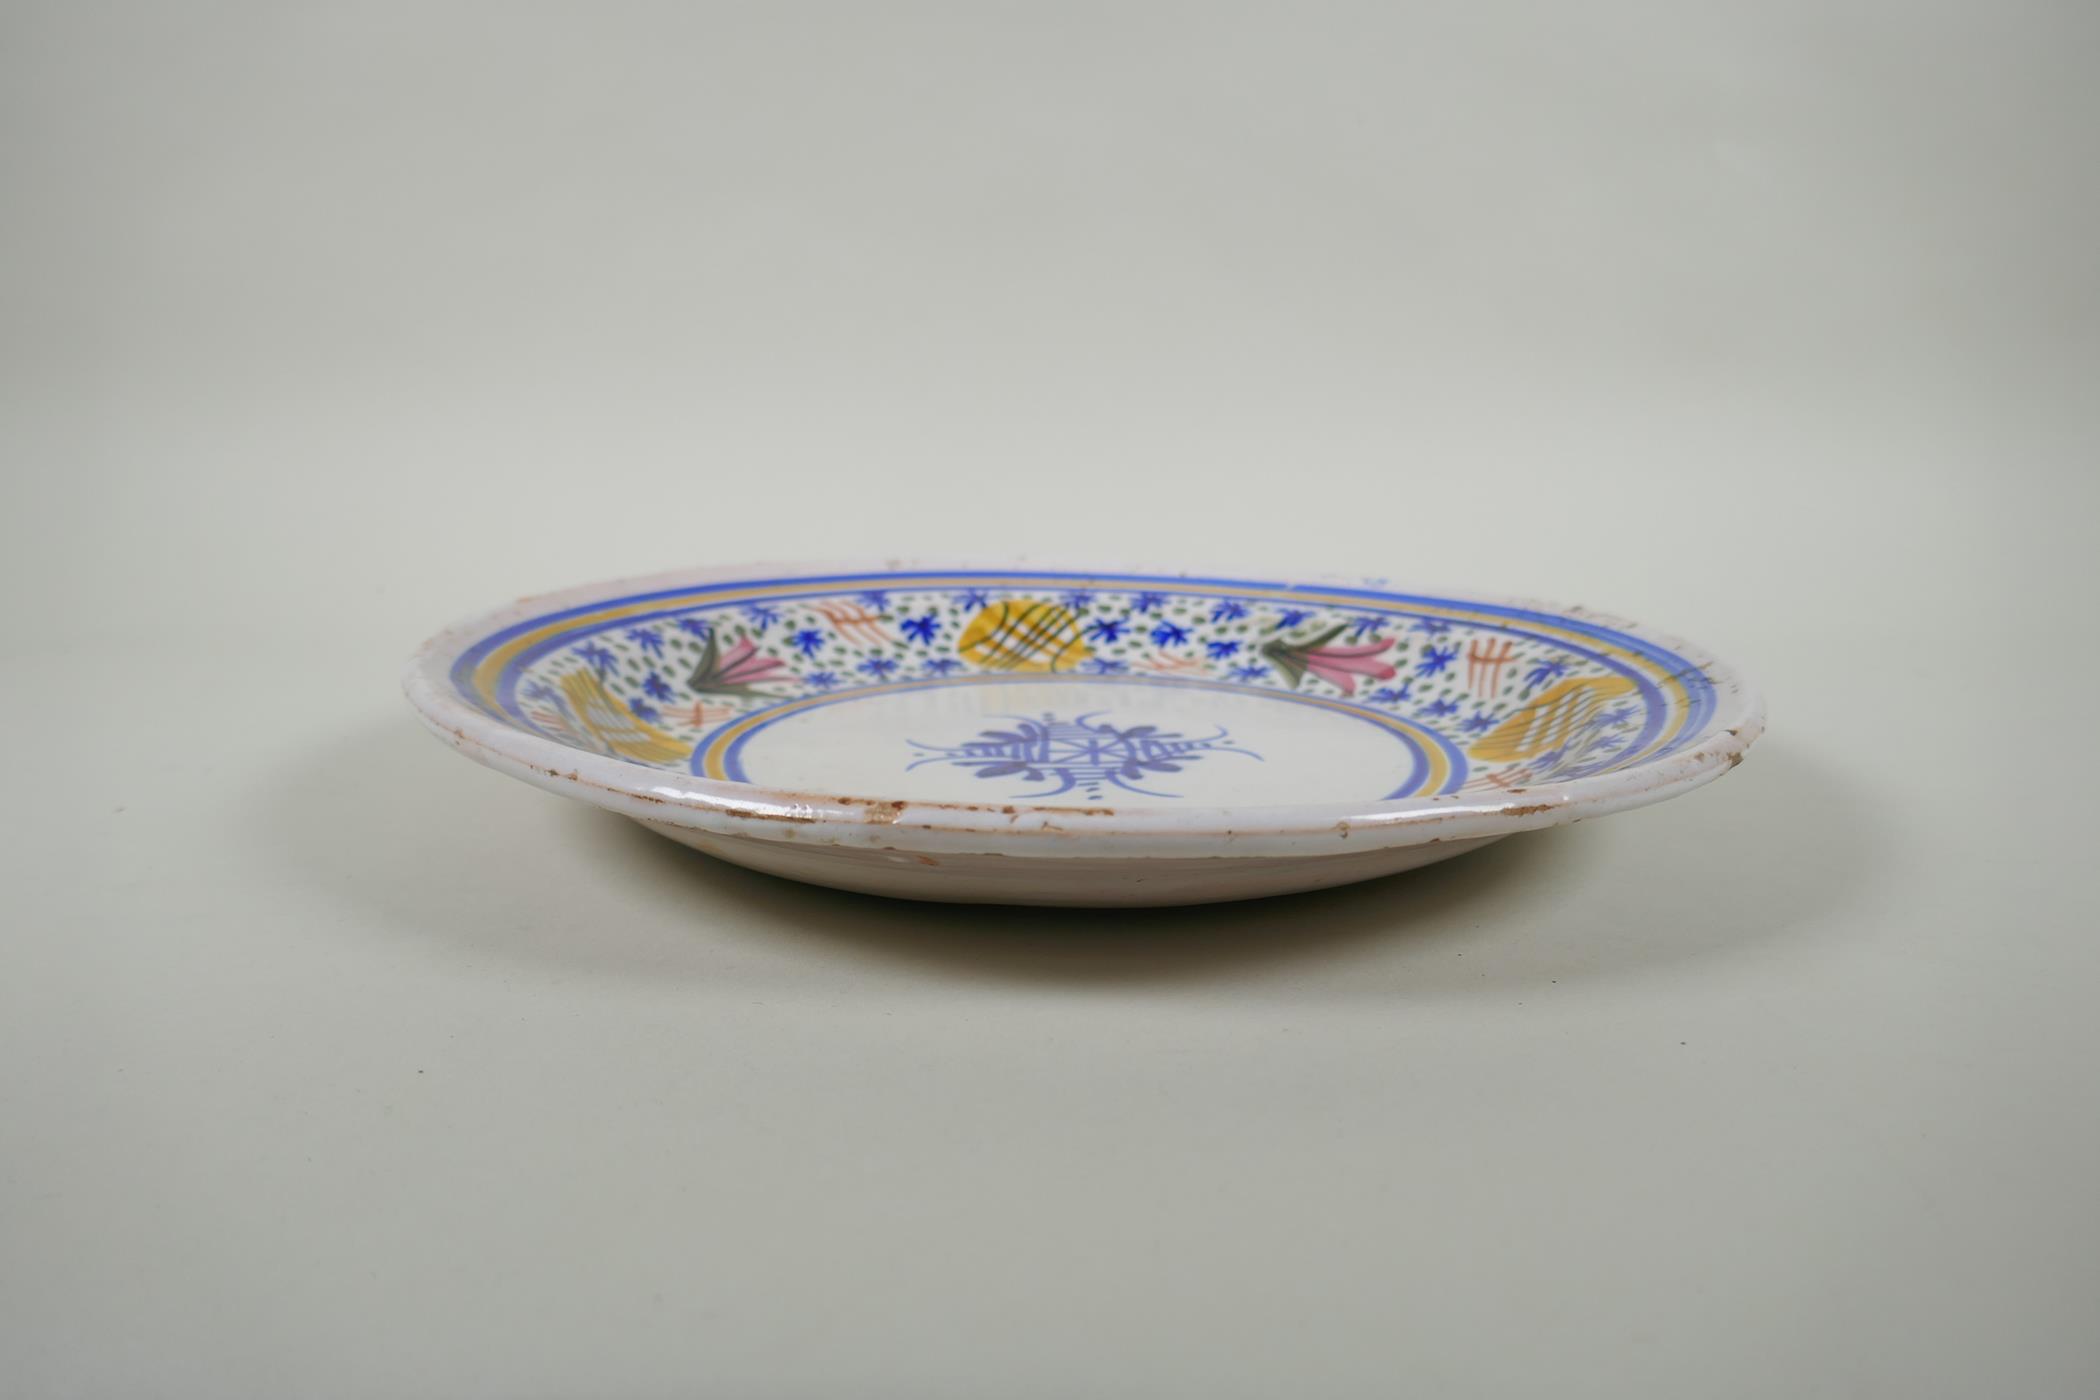 An antique Delft plate decorated with a floral design, 32cm diameter - Image 2 of 3